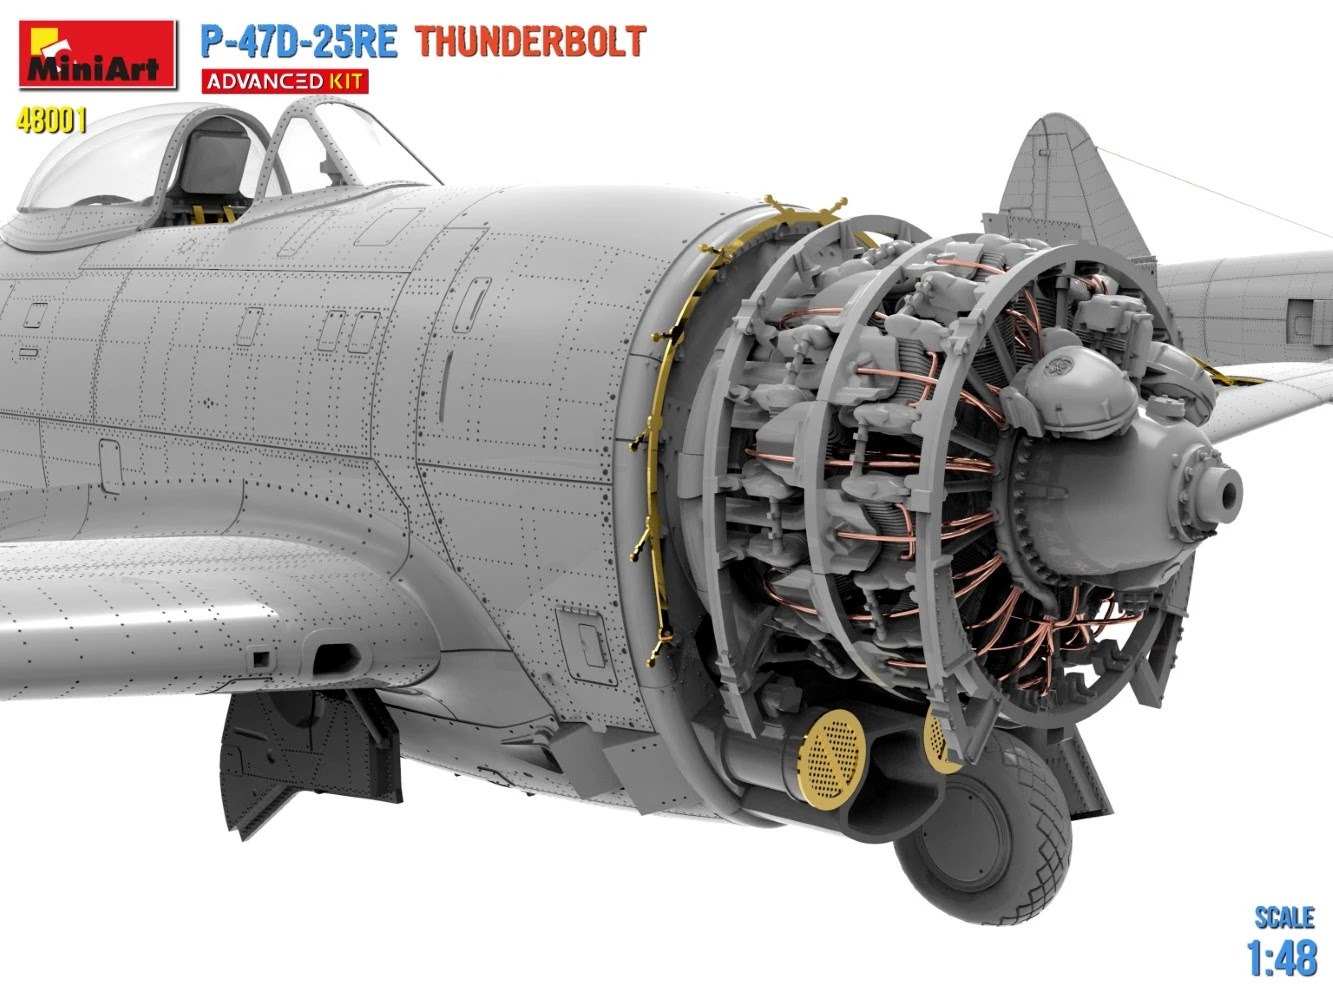 MiniArt ups the detail on their P-47D CAD Engine Detail-2